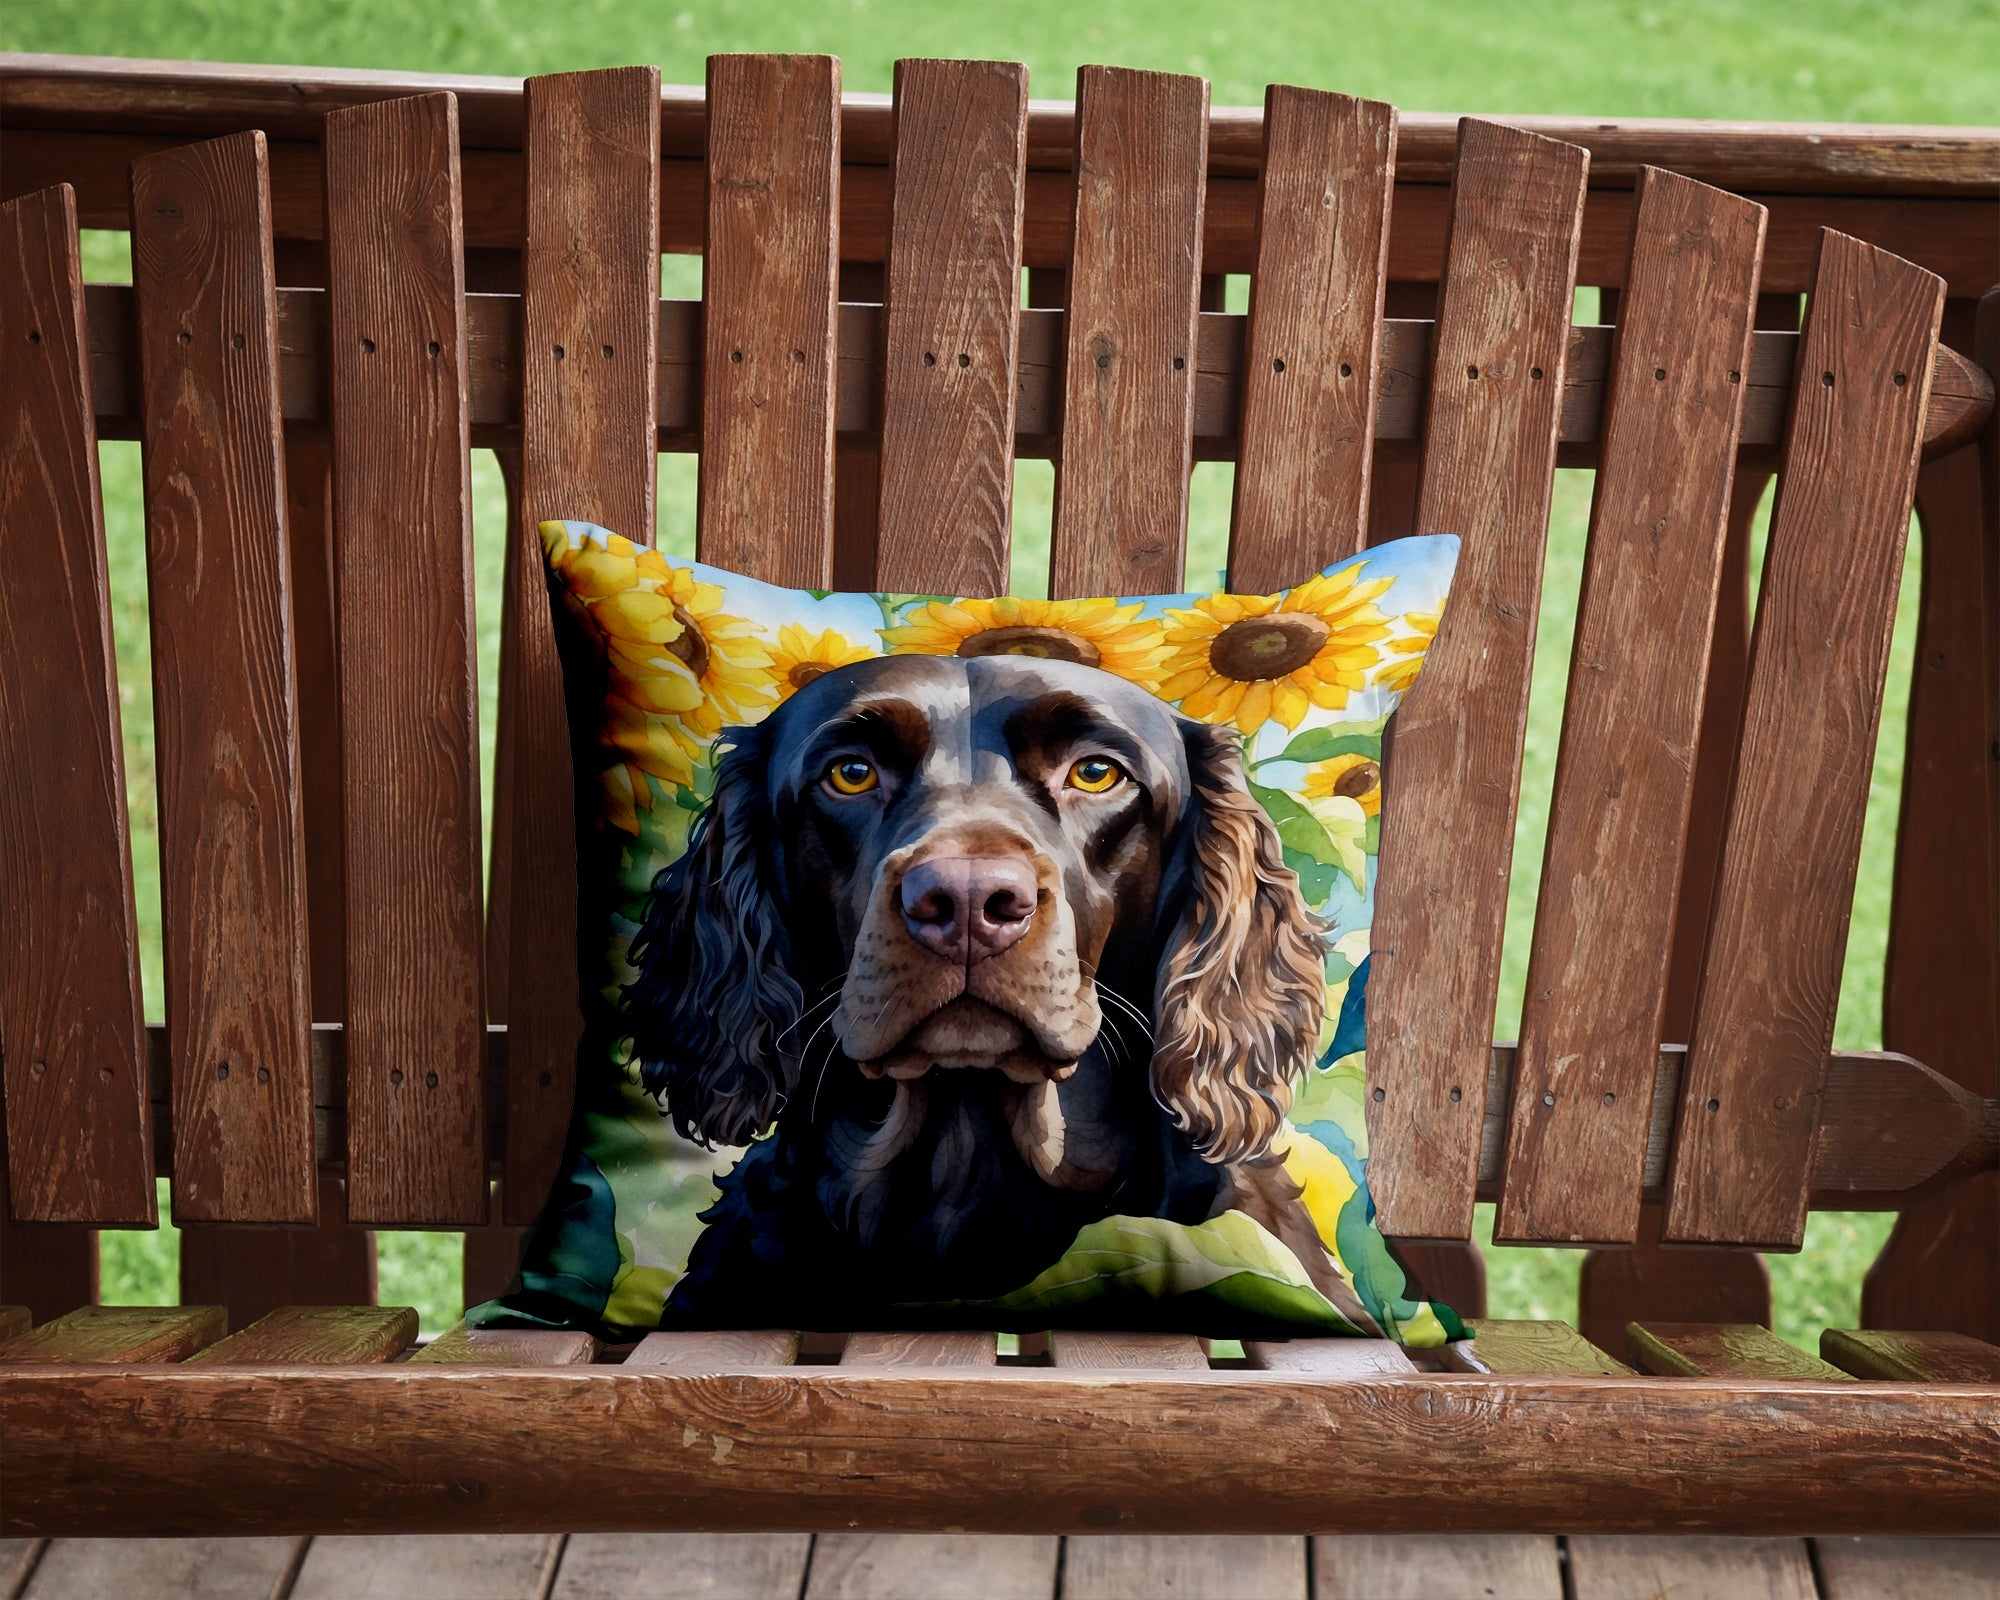 Buy this American Water Spaniel in Sunflowers Throw Pillow